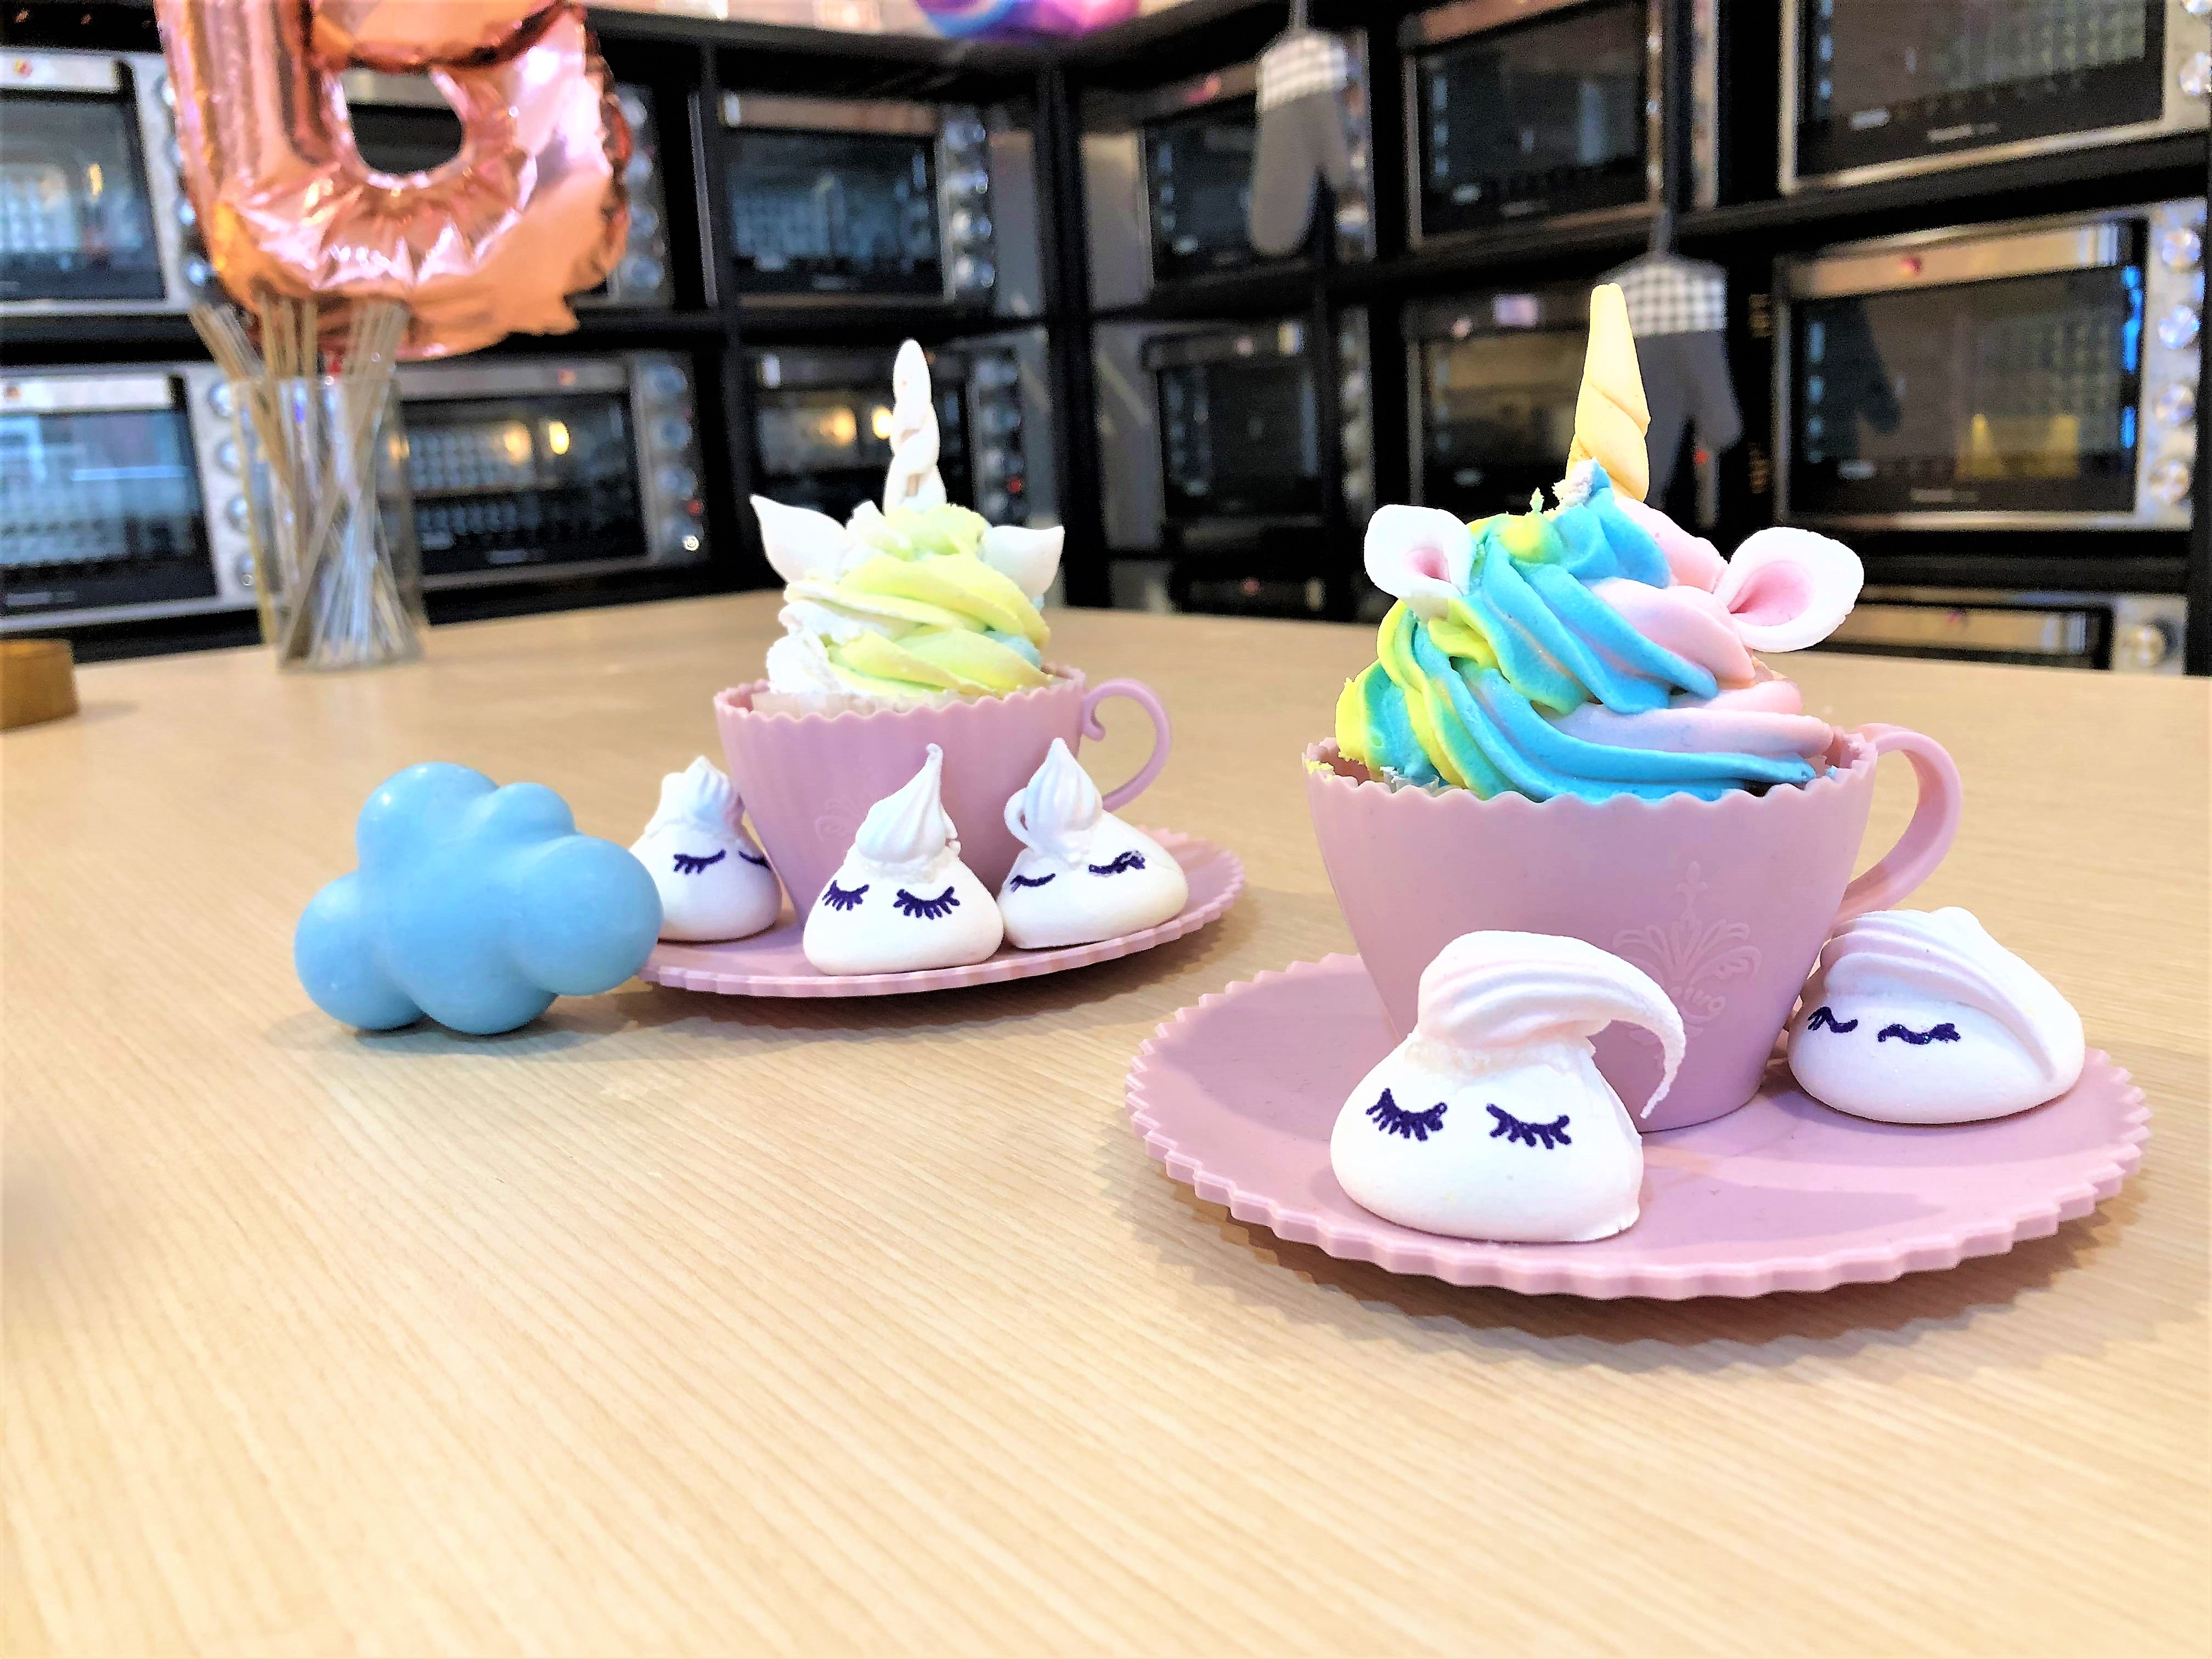 These colourful unicorn cupcakes made by the Bakebe team look adorable and delicious.